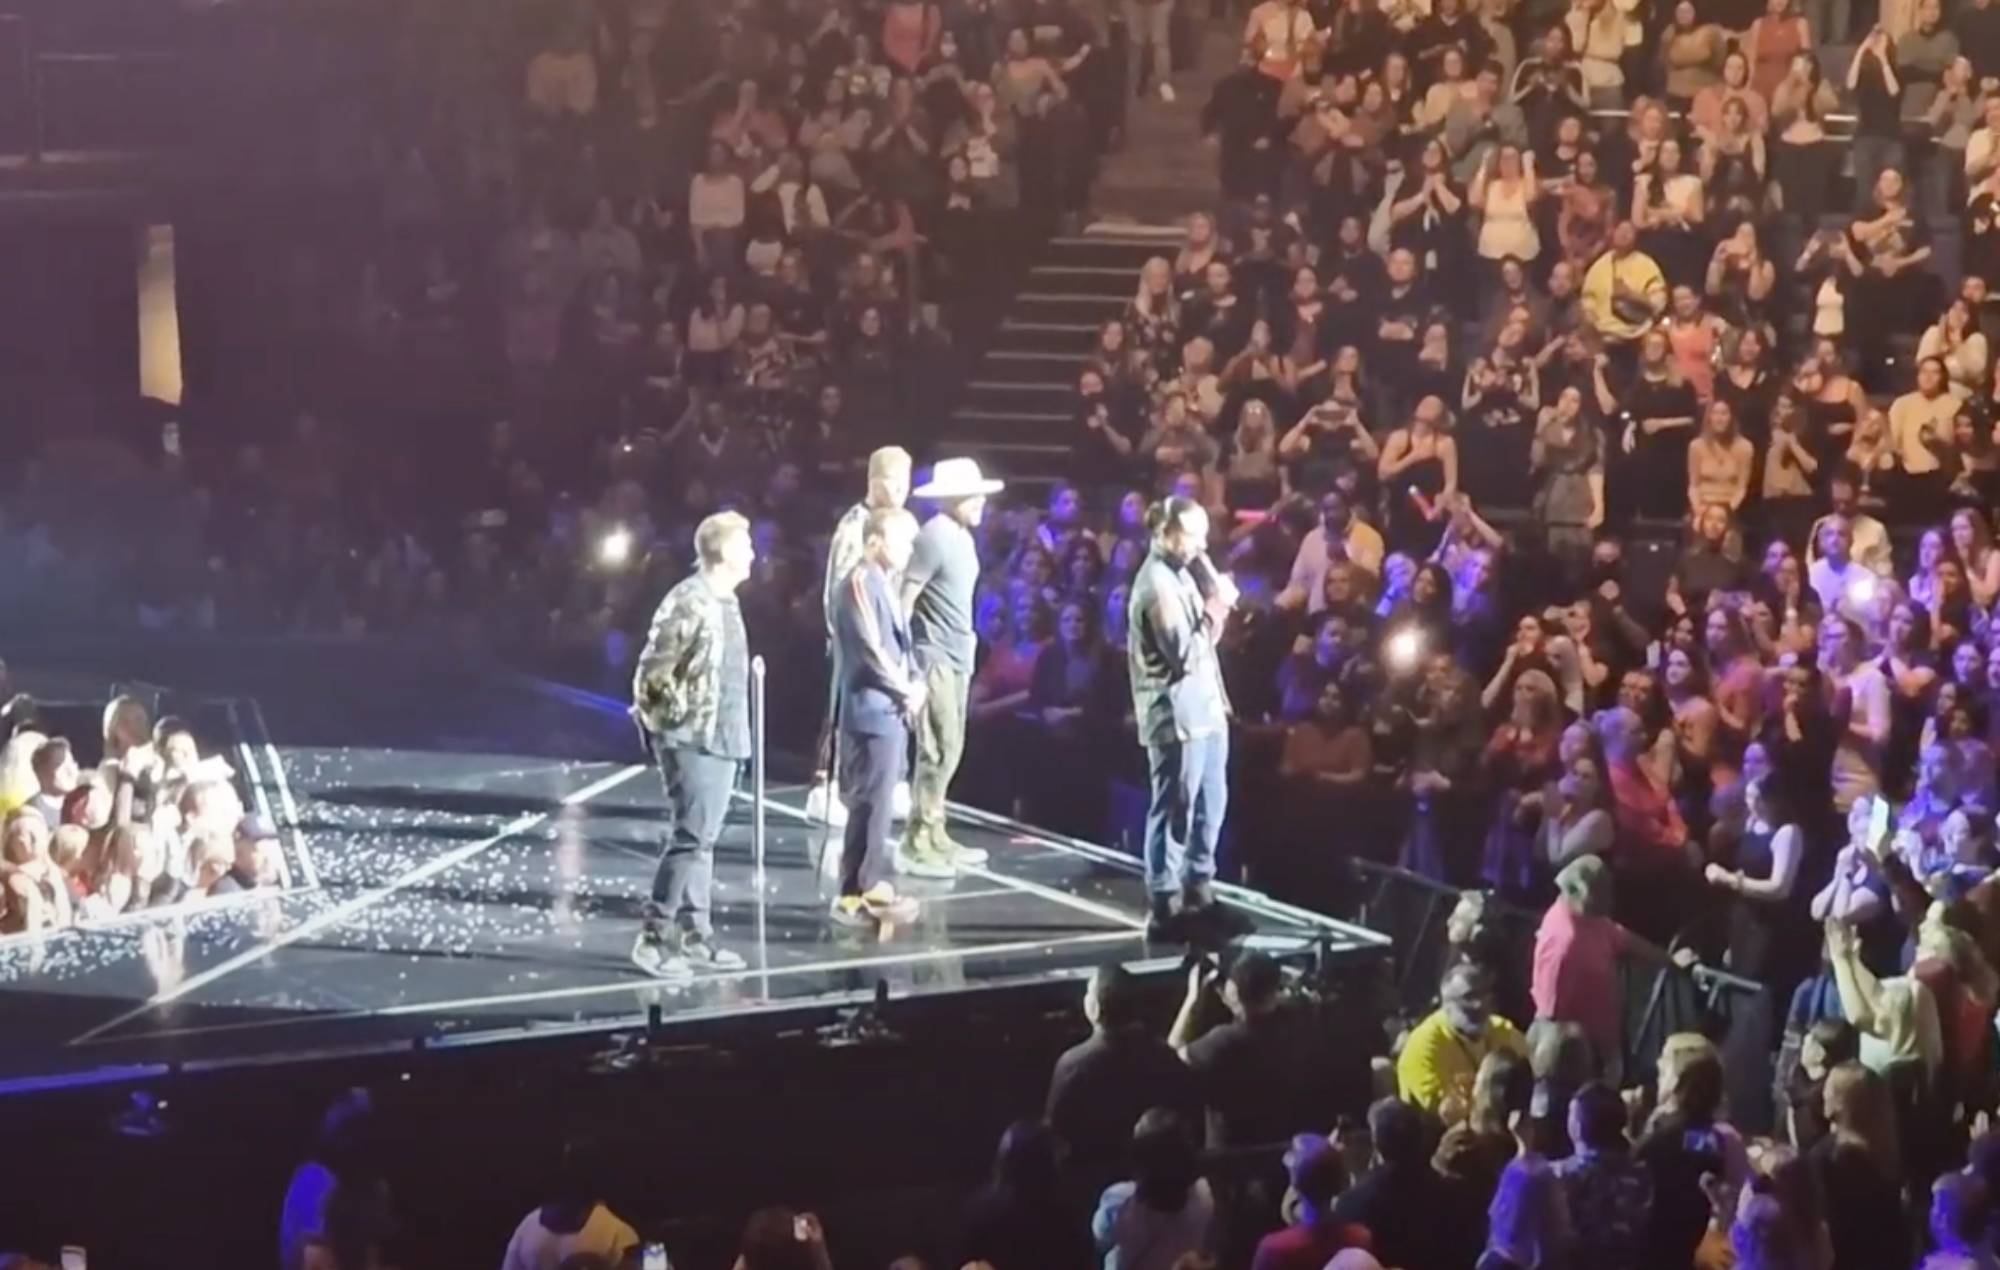 Backstreet Boys pay tribute to Aaron Carter at London concert: 'We lost one  of our family members' - Good Morning America